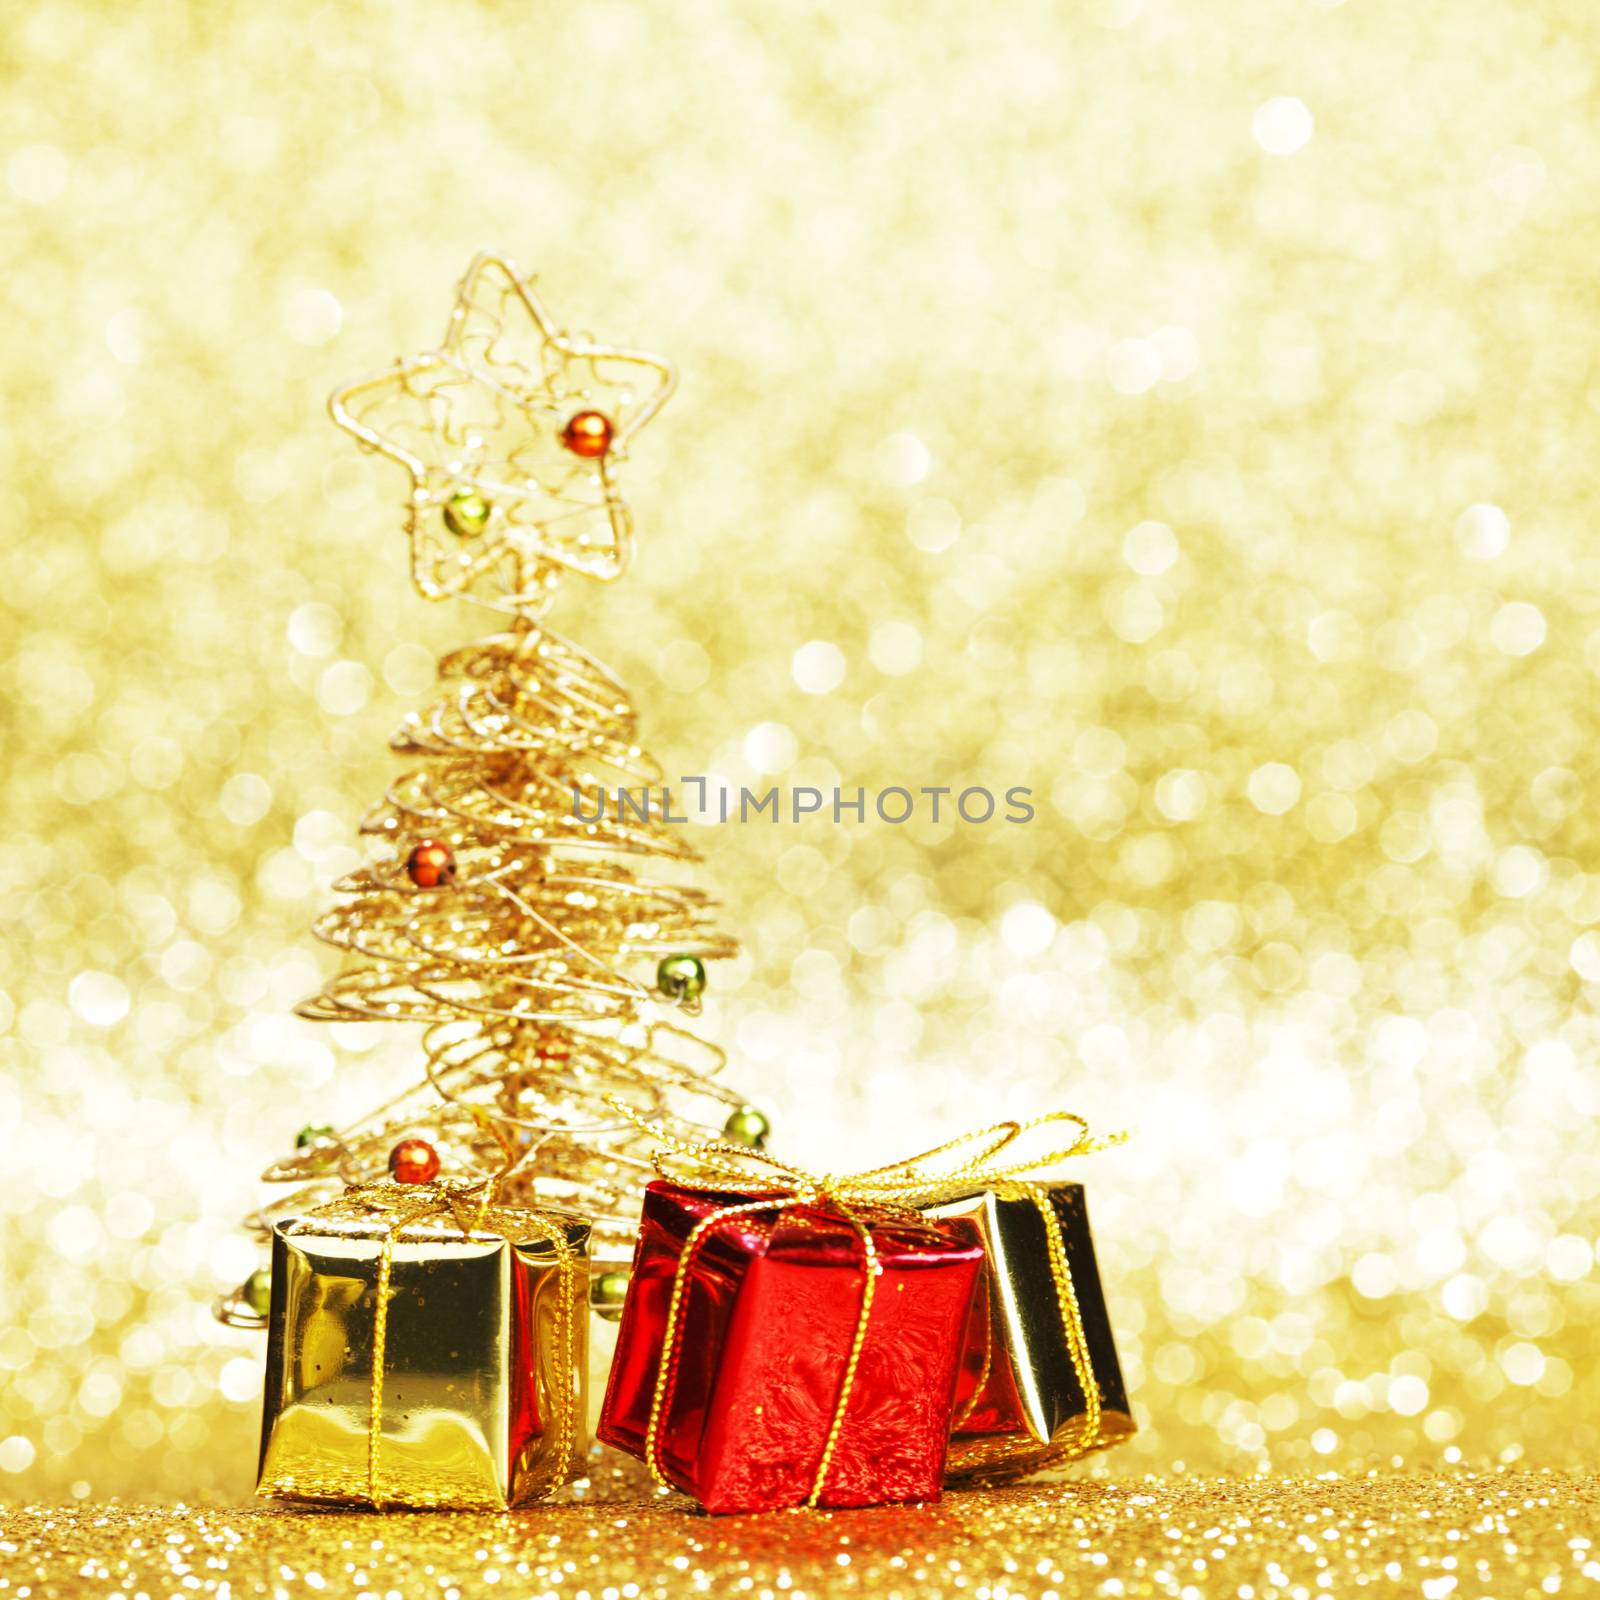 Decorative golden toy christmas tree and gifts on golden background